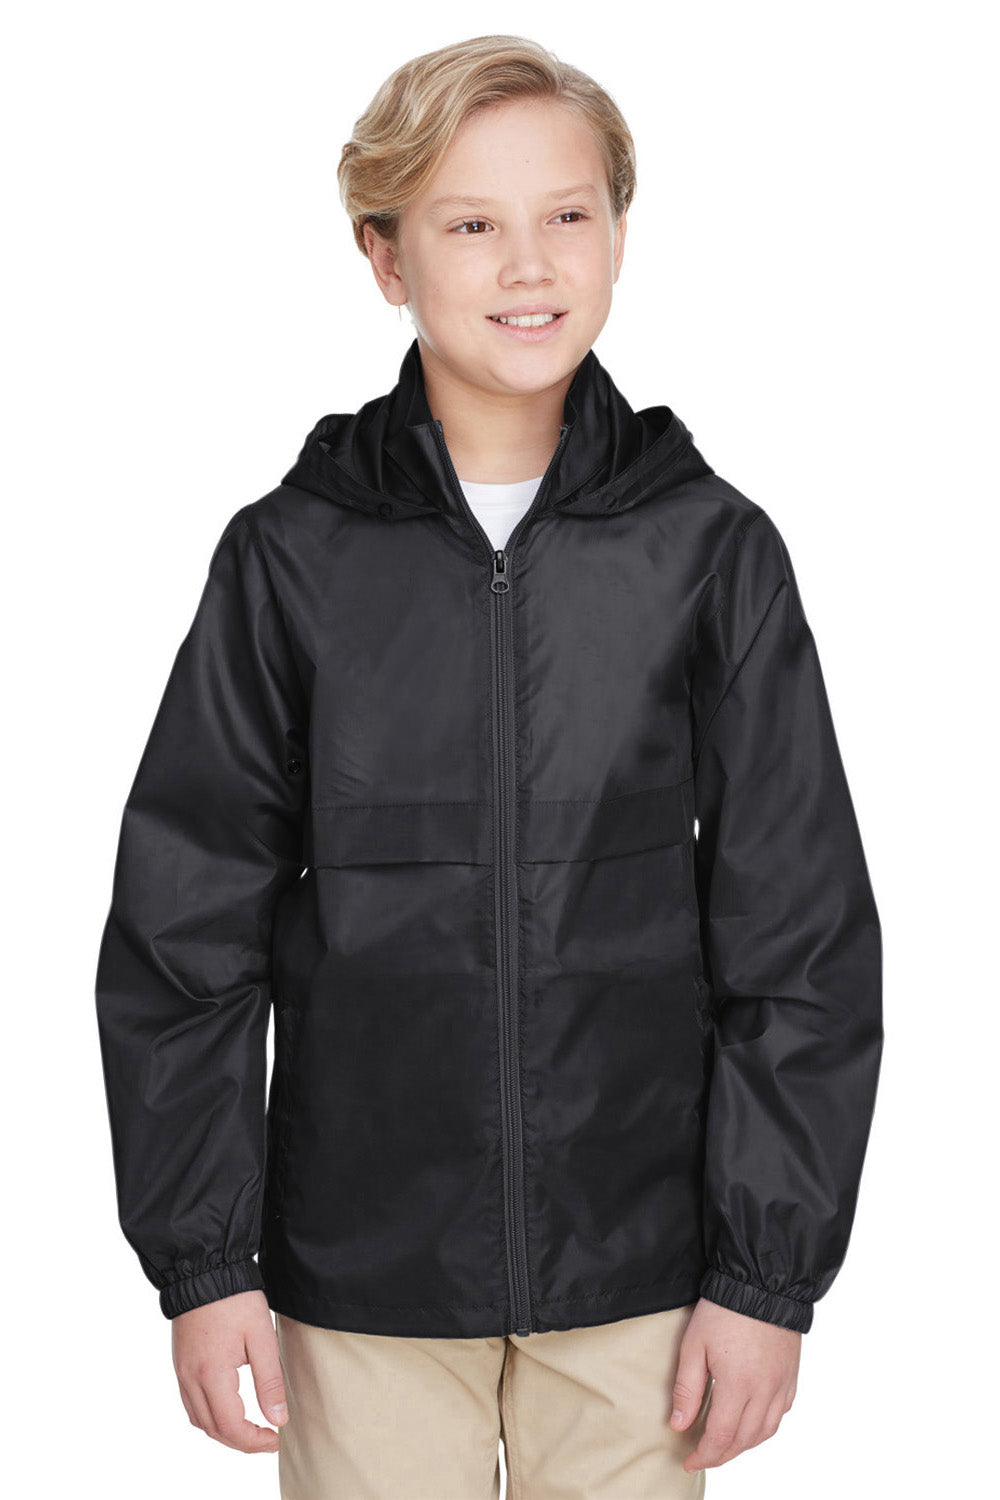 Team 365 TT73Y Youth Zone Protect Water Resistant Full Zip Hooded Jacket Black Front